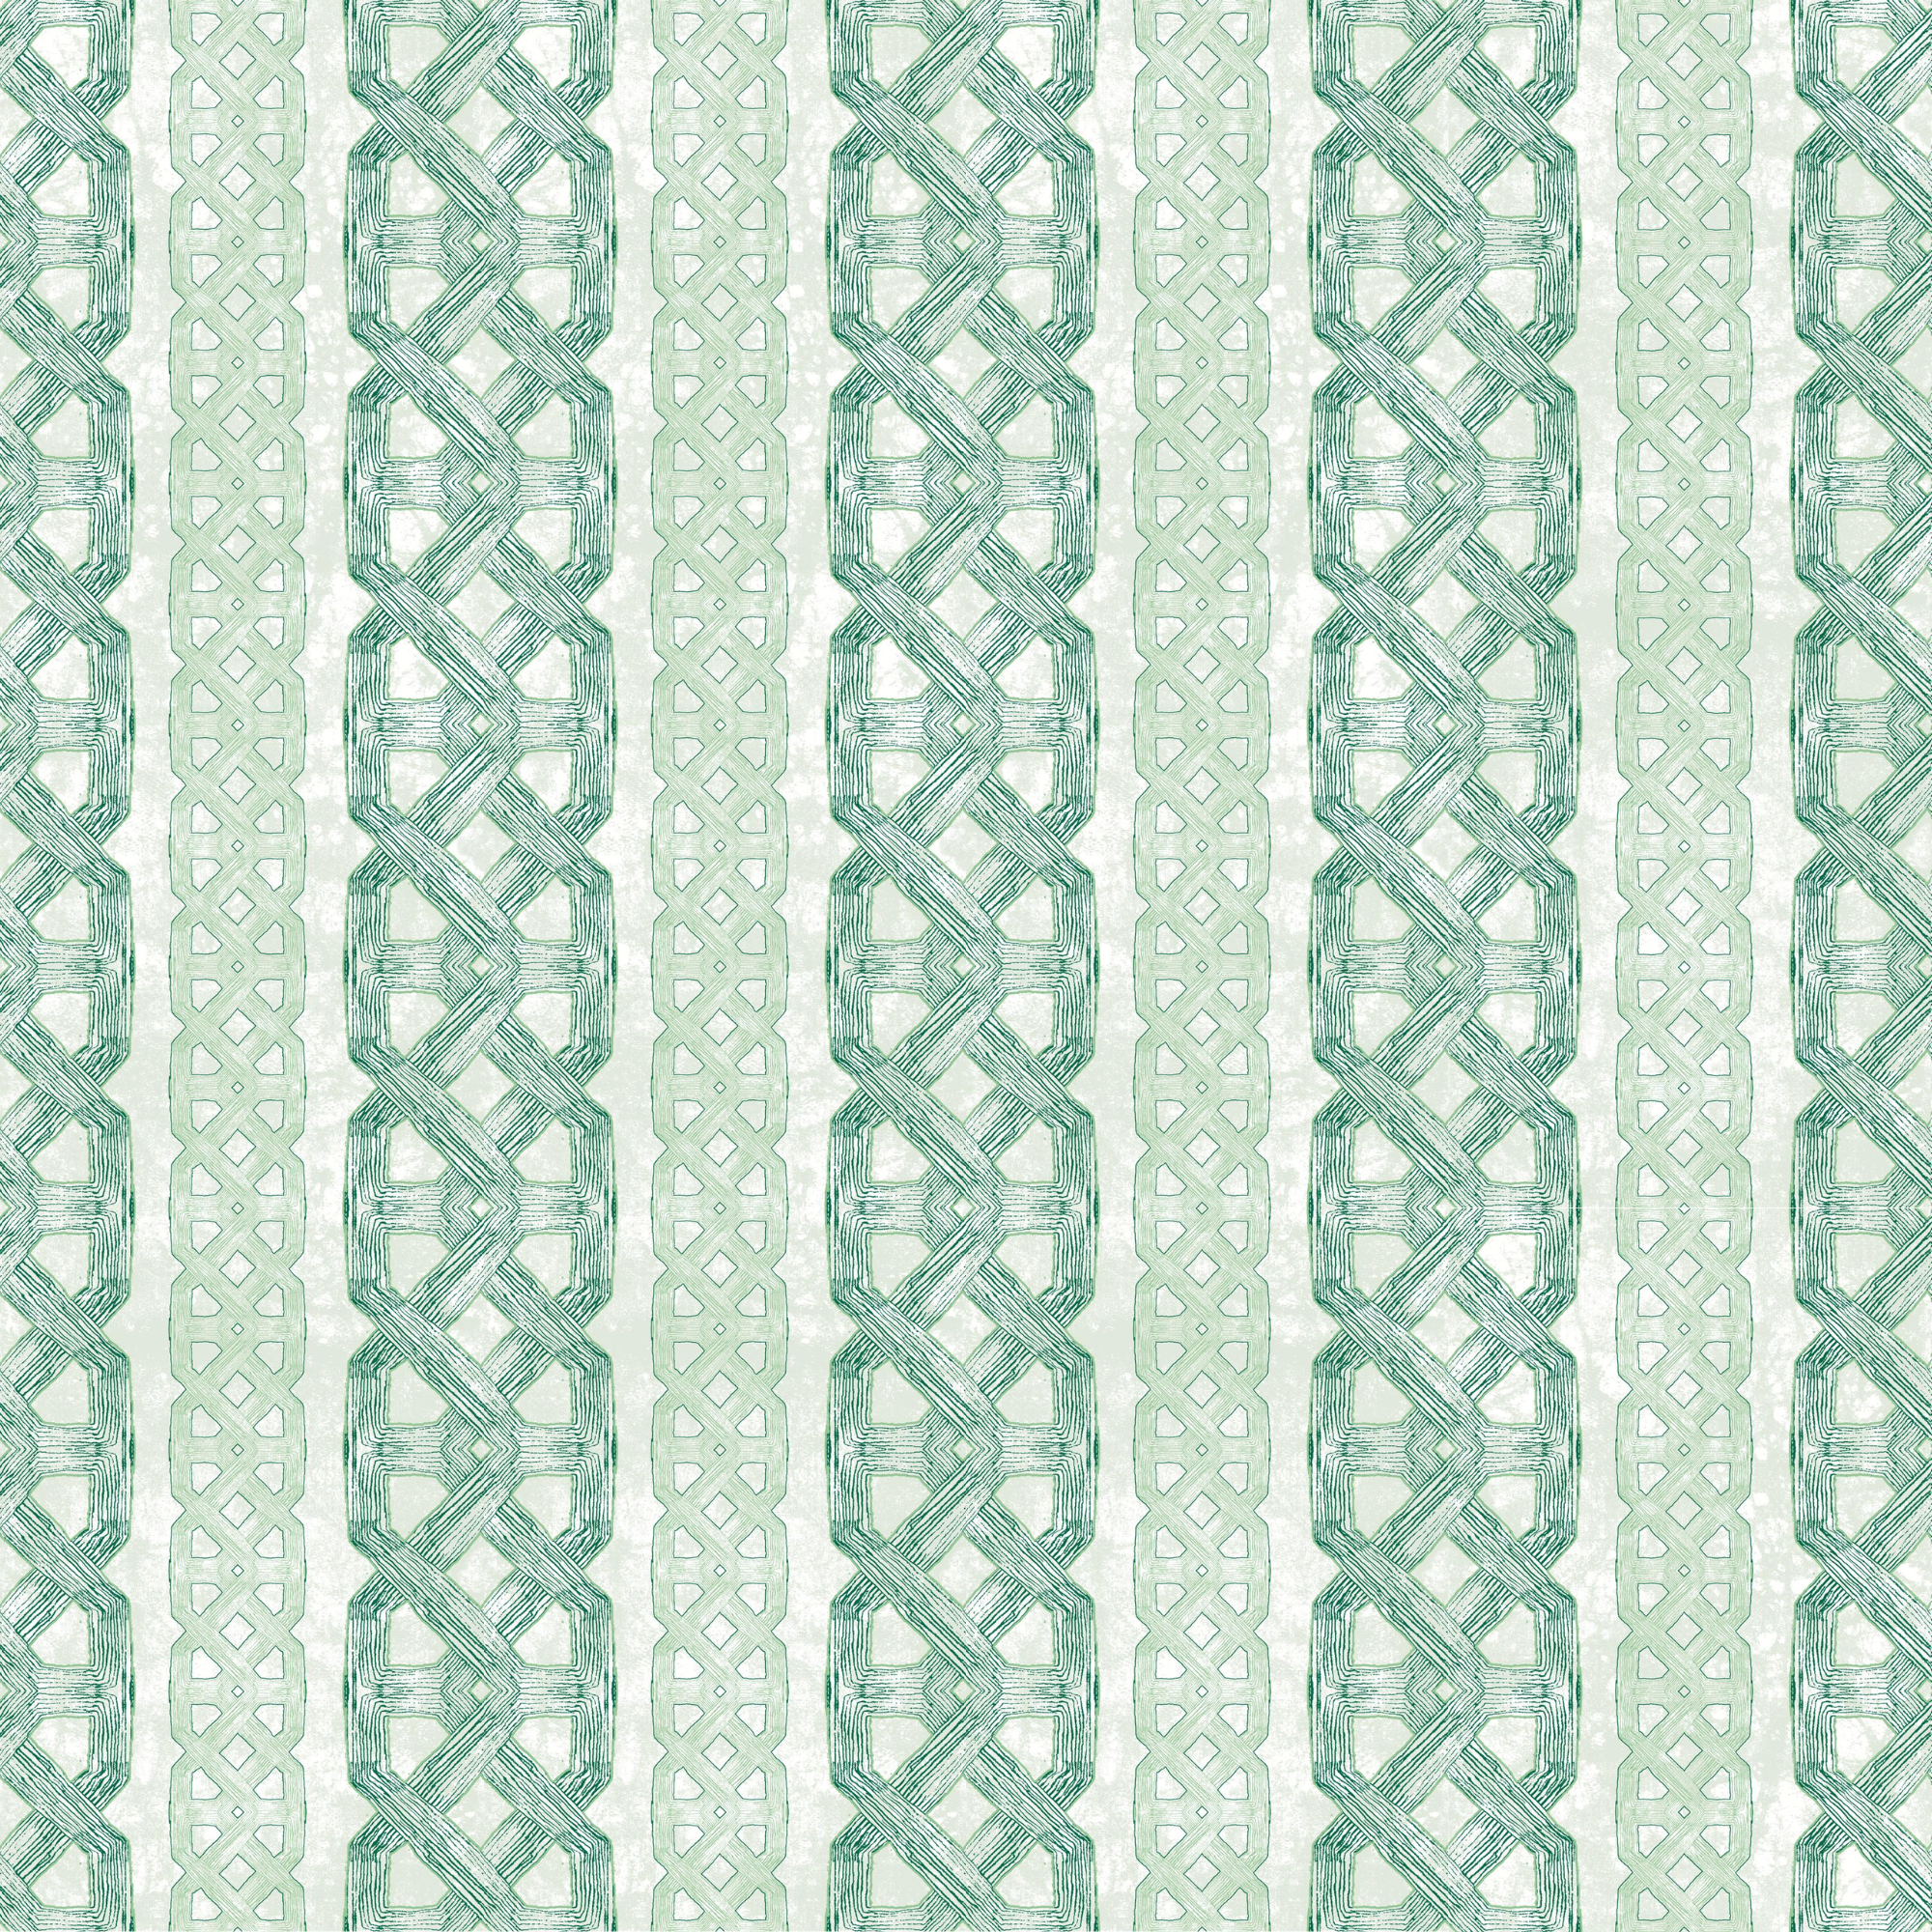 Detail of wallpaper in a geometric stripe print in green and turquoise on a mottled cream field.